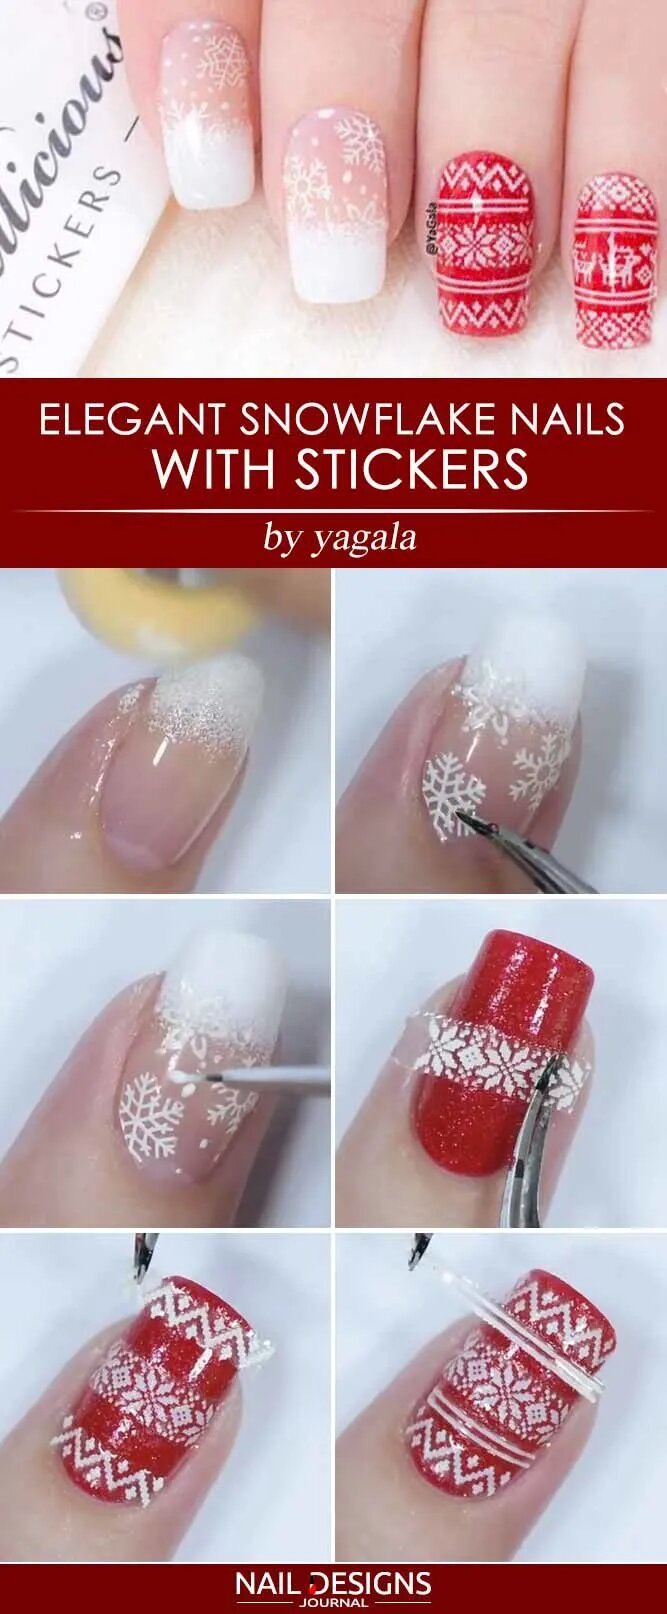 Elegant Snowflake Nails With Stickers